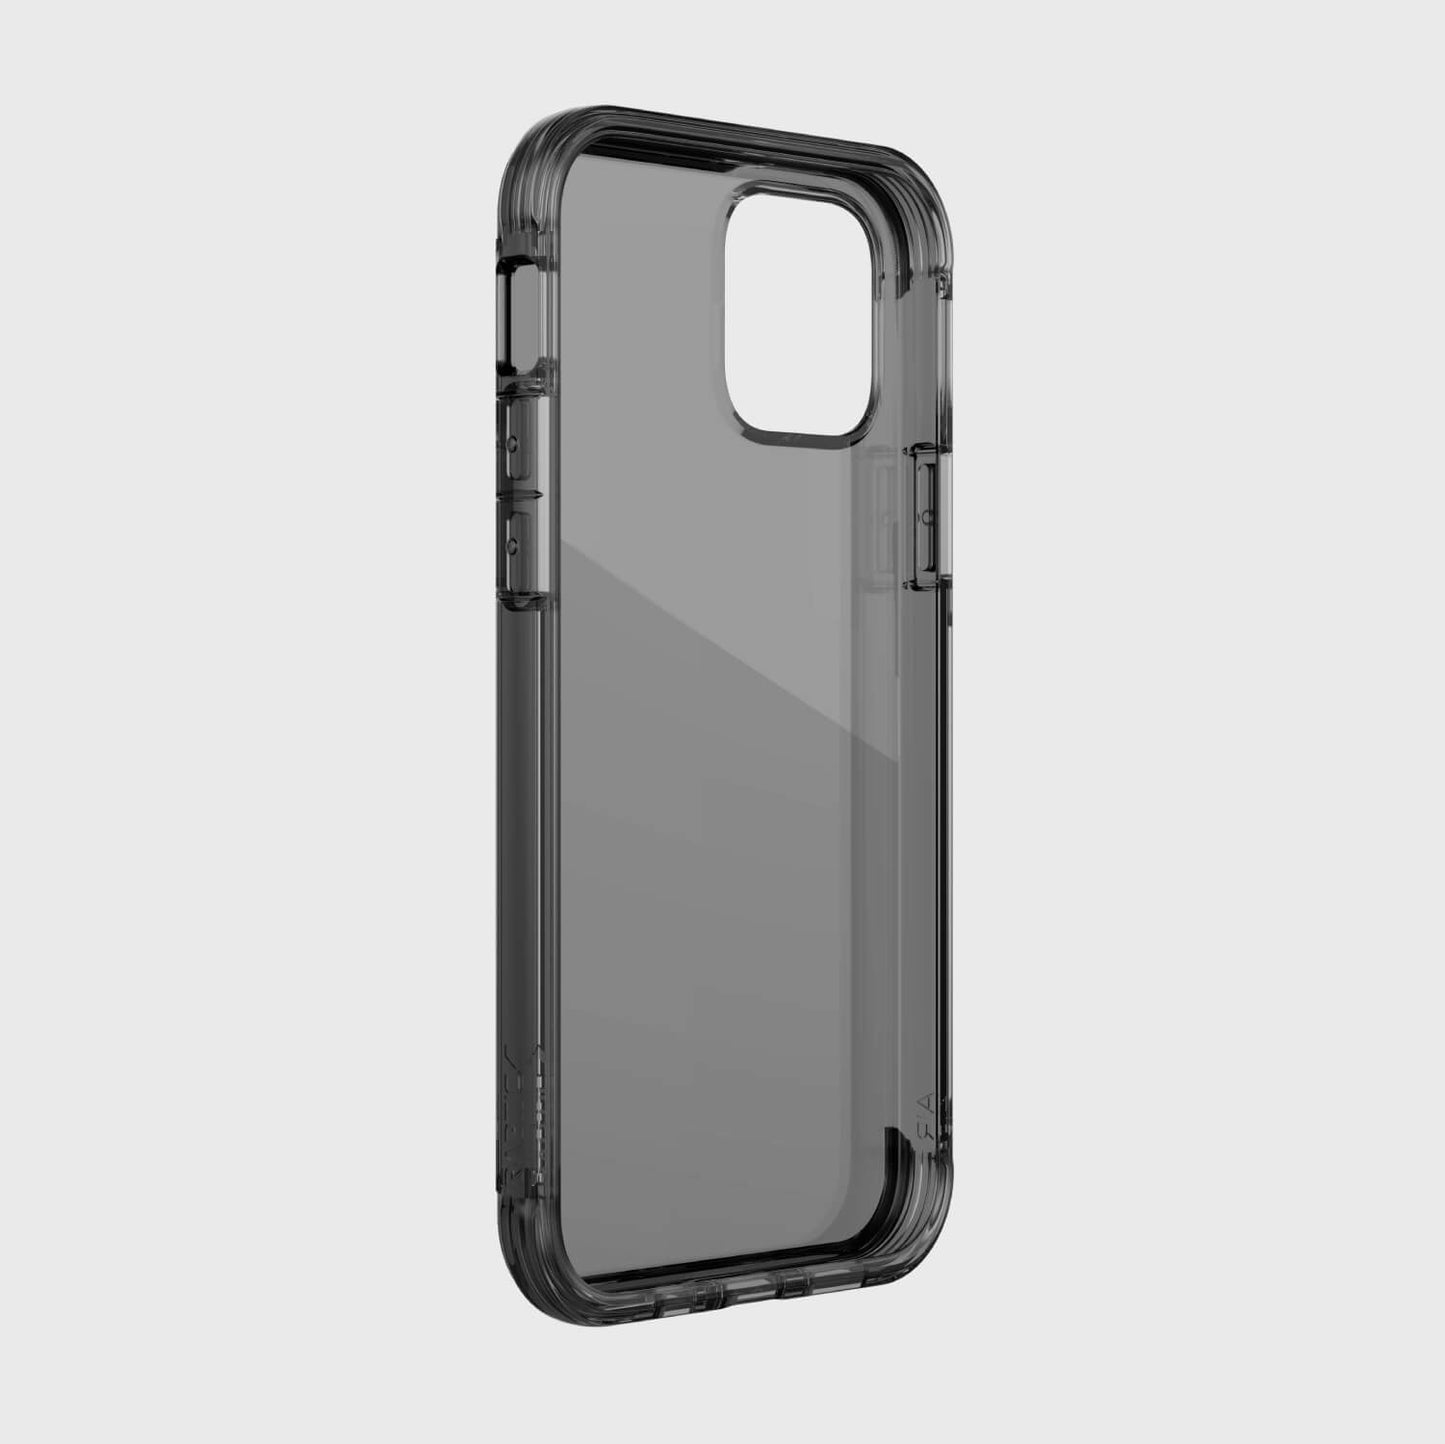 The back view of a Raptic AIR protective case for iPhone 12 & iPhone 12 Pro.